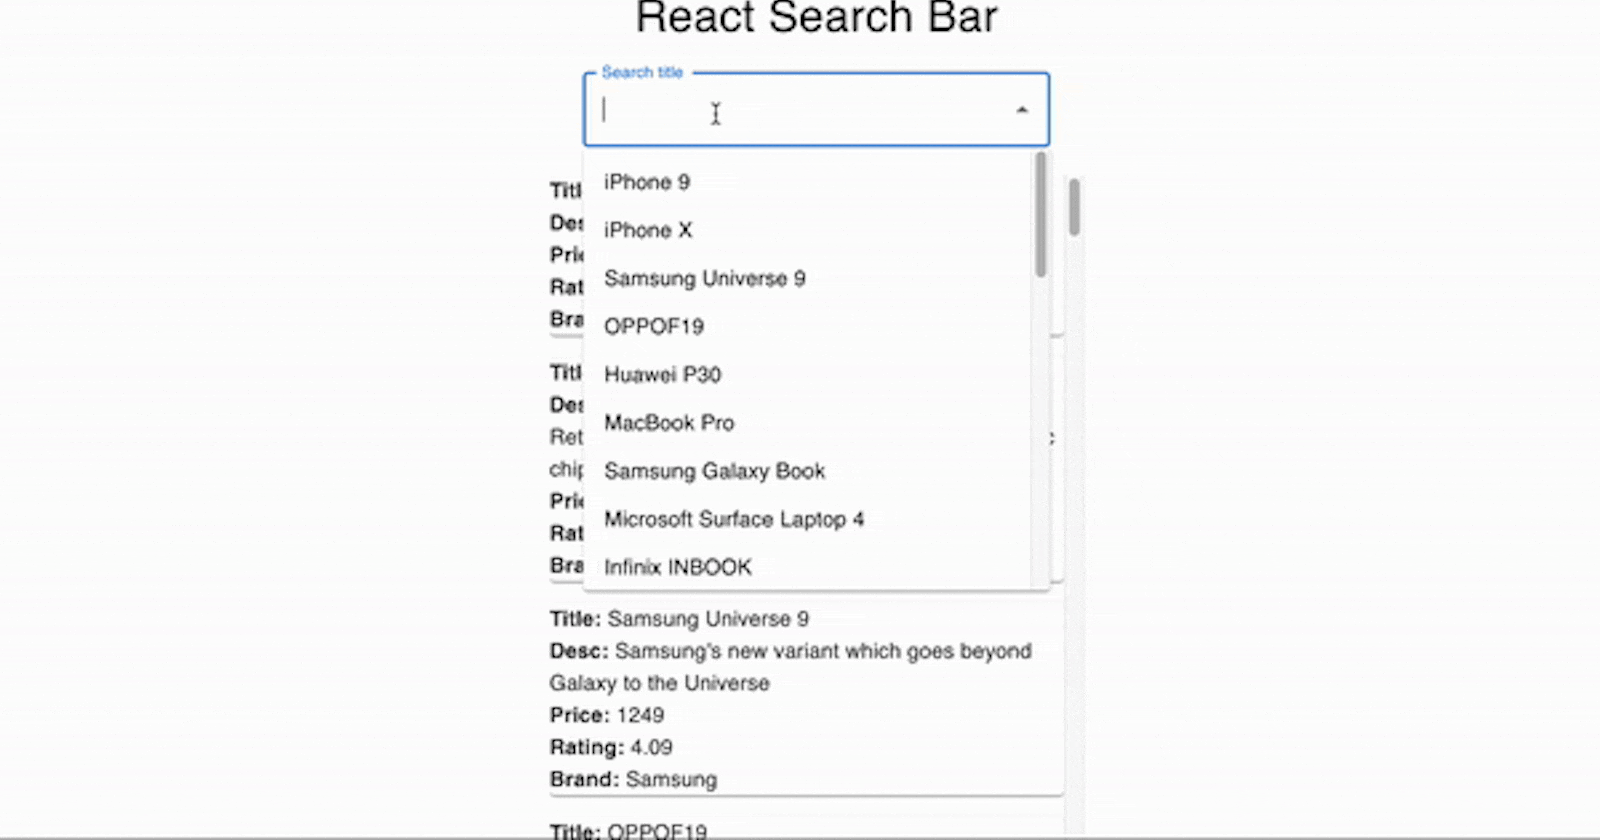 How to Create a React Search Bar using MUI? [with ready-made GitHub Repo]